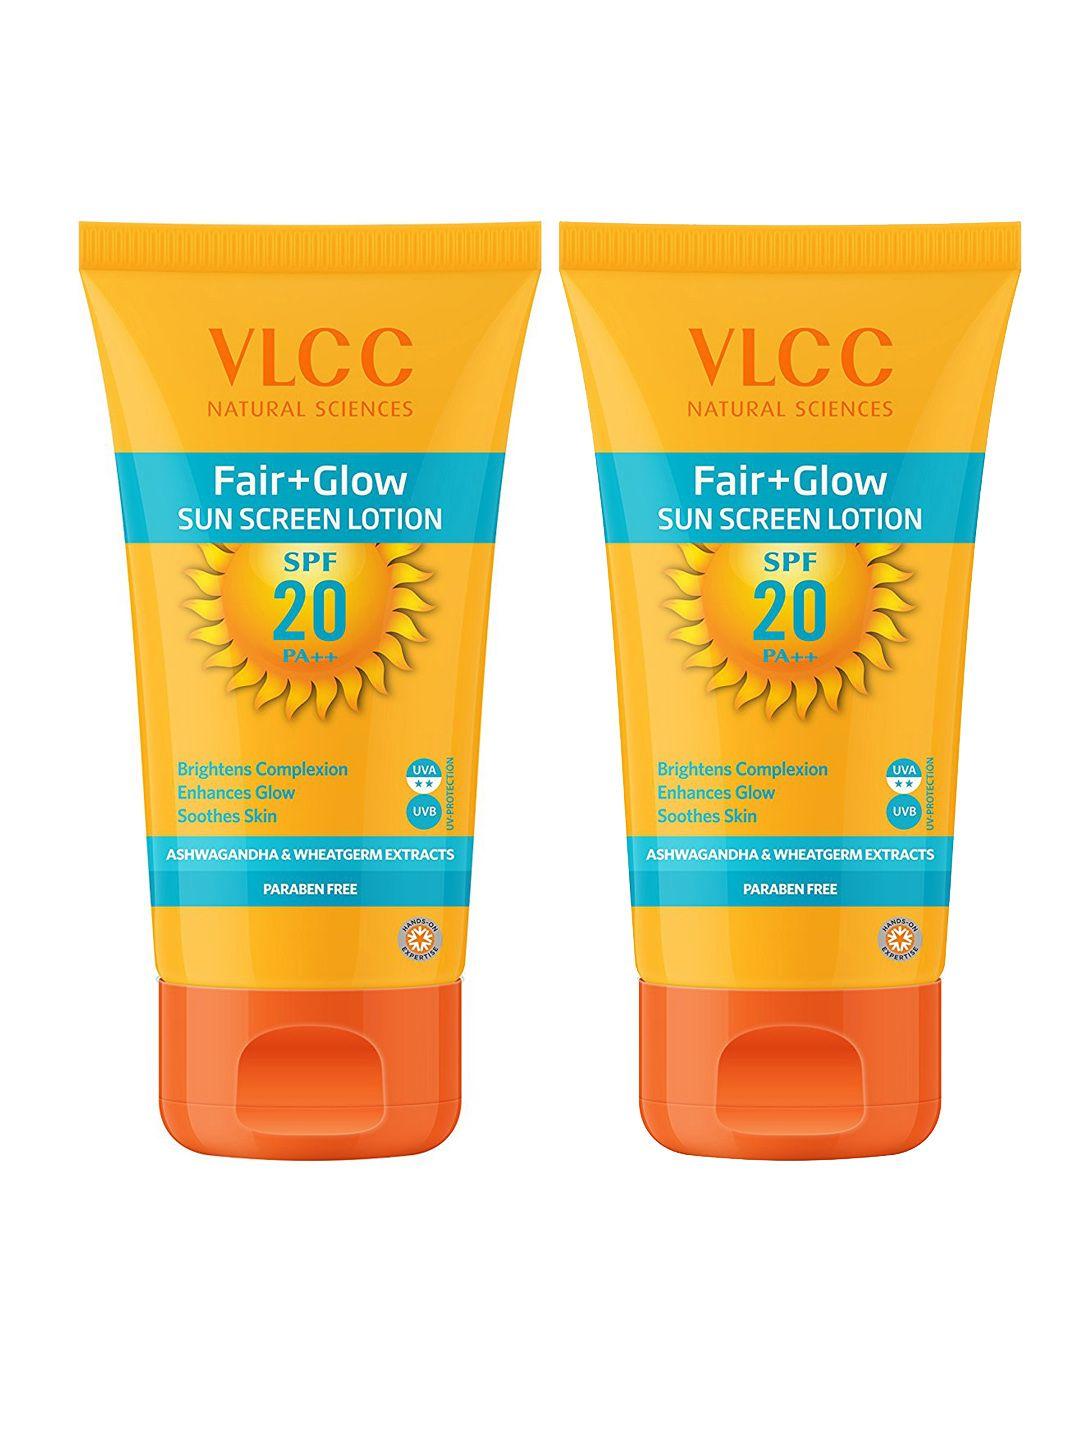 VLCC Pack of 2 Fair + Glow Sunscreen Lotion